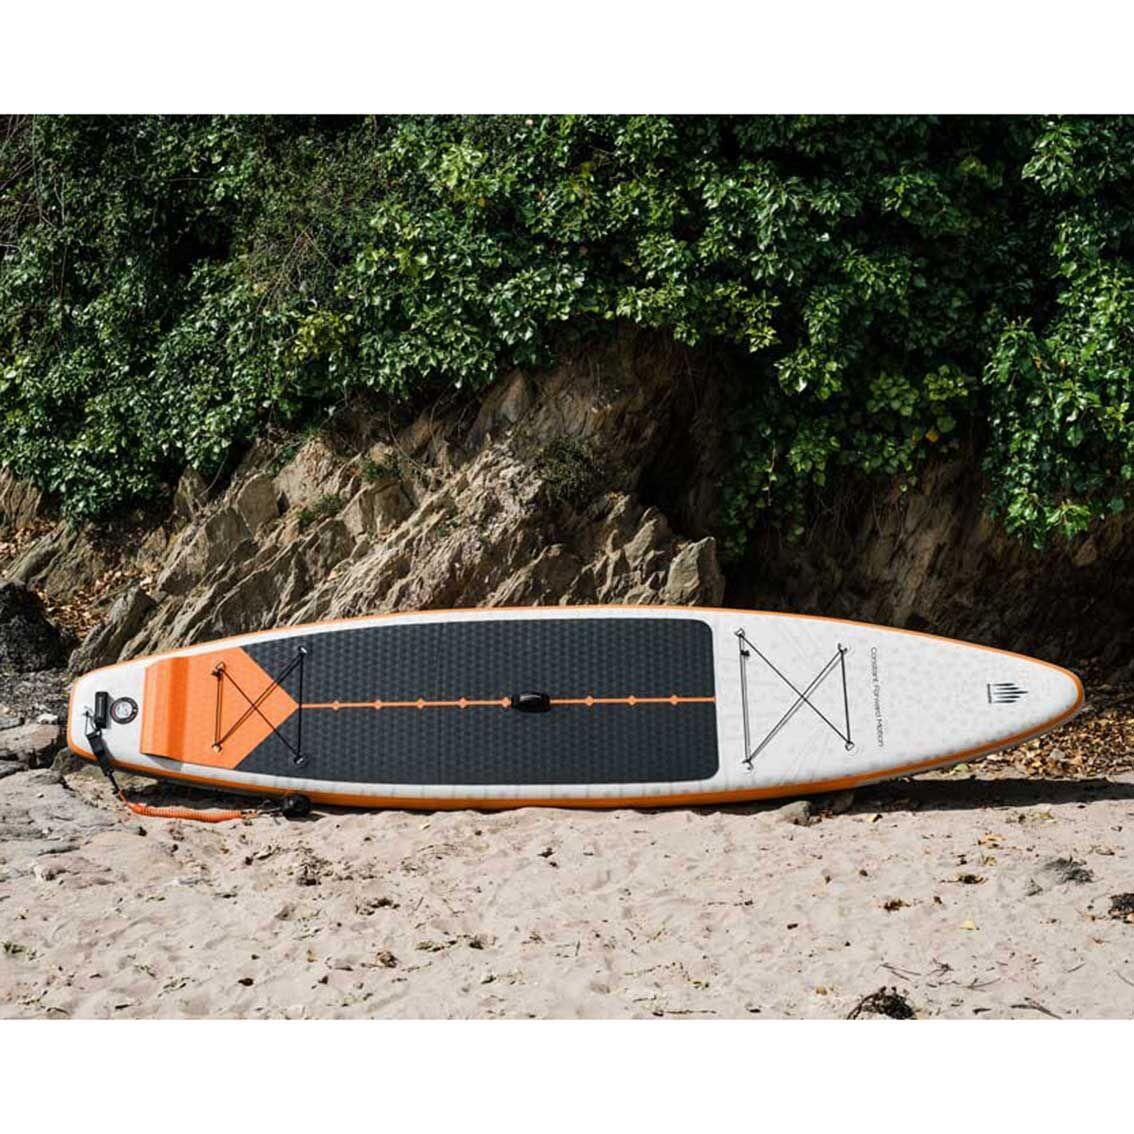 SHARK TOURING 12'6 x 30" x 5" FOR LIGHTER RIDERS 7/7